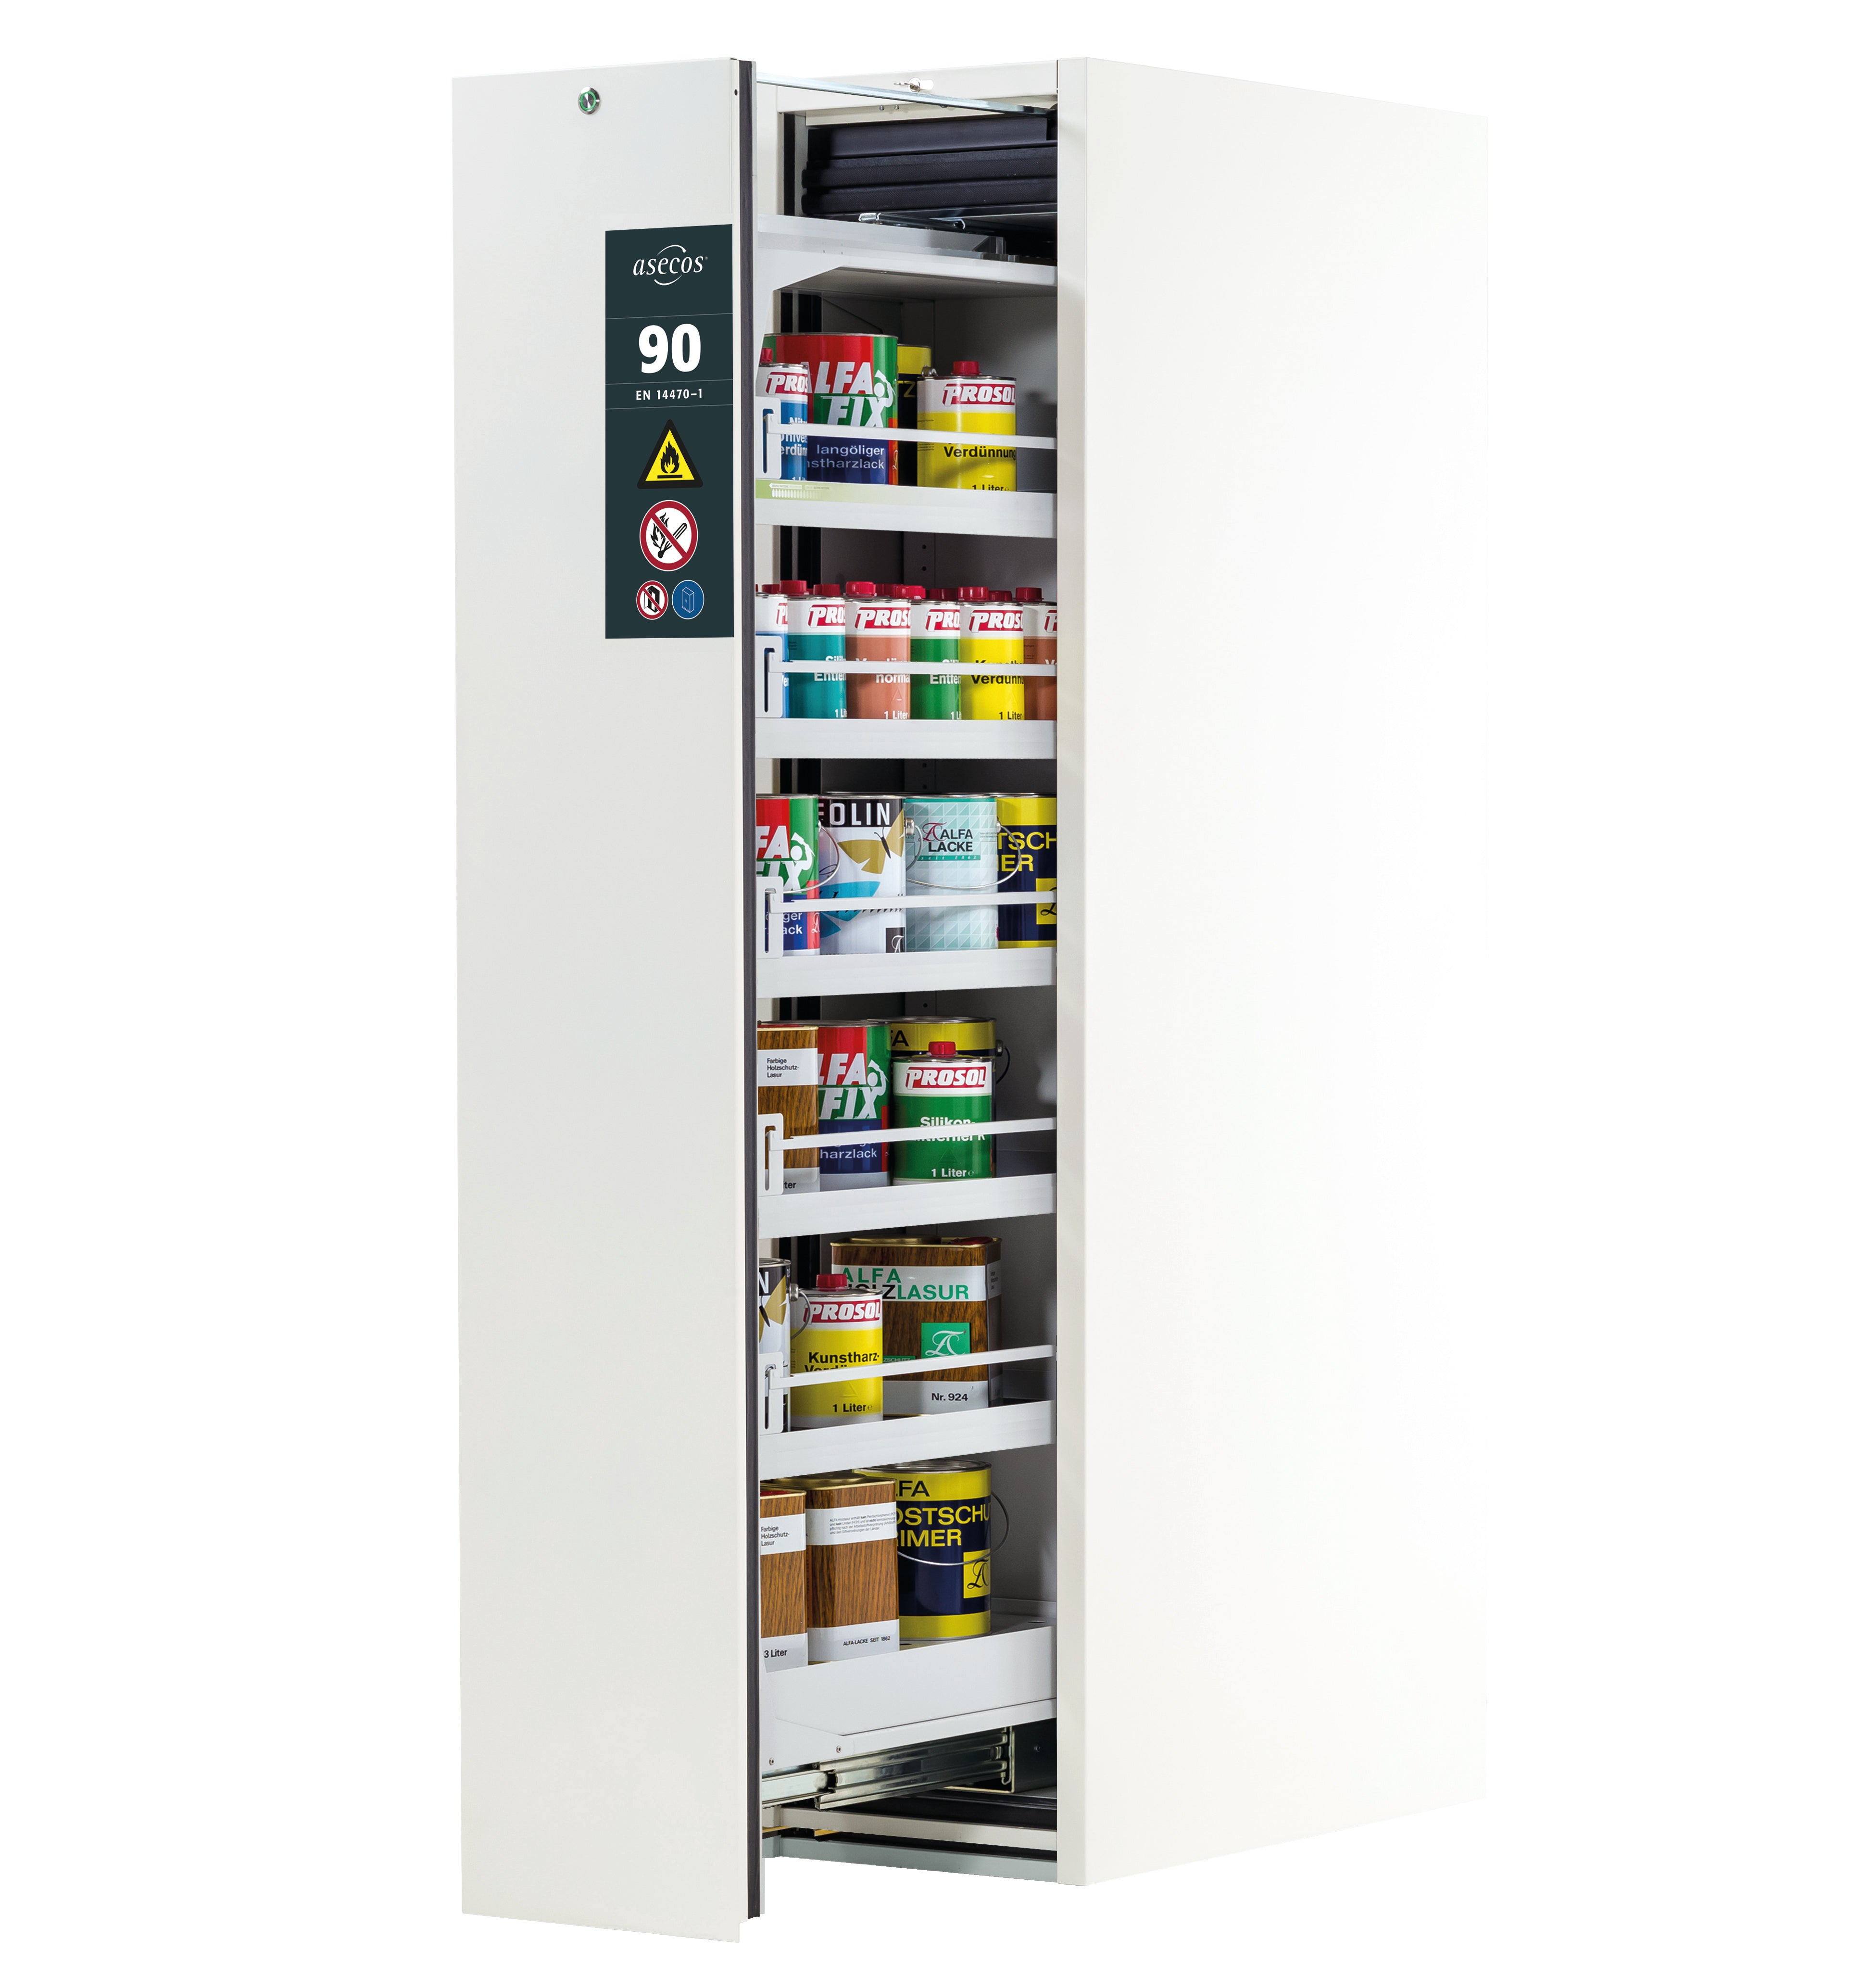 Type 90 safety cabinet V-MOVE-90 model V90.196.045.VDAC:0012 in laboratory white (similar to RAL 9016) with 5x standard tray base (sheet steel)